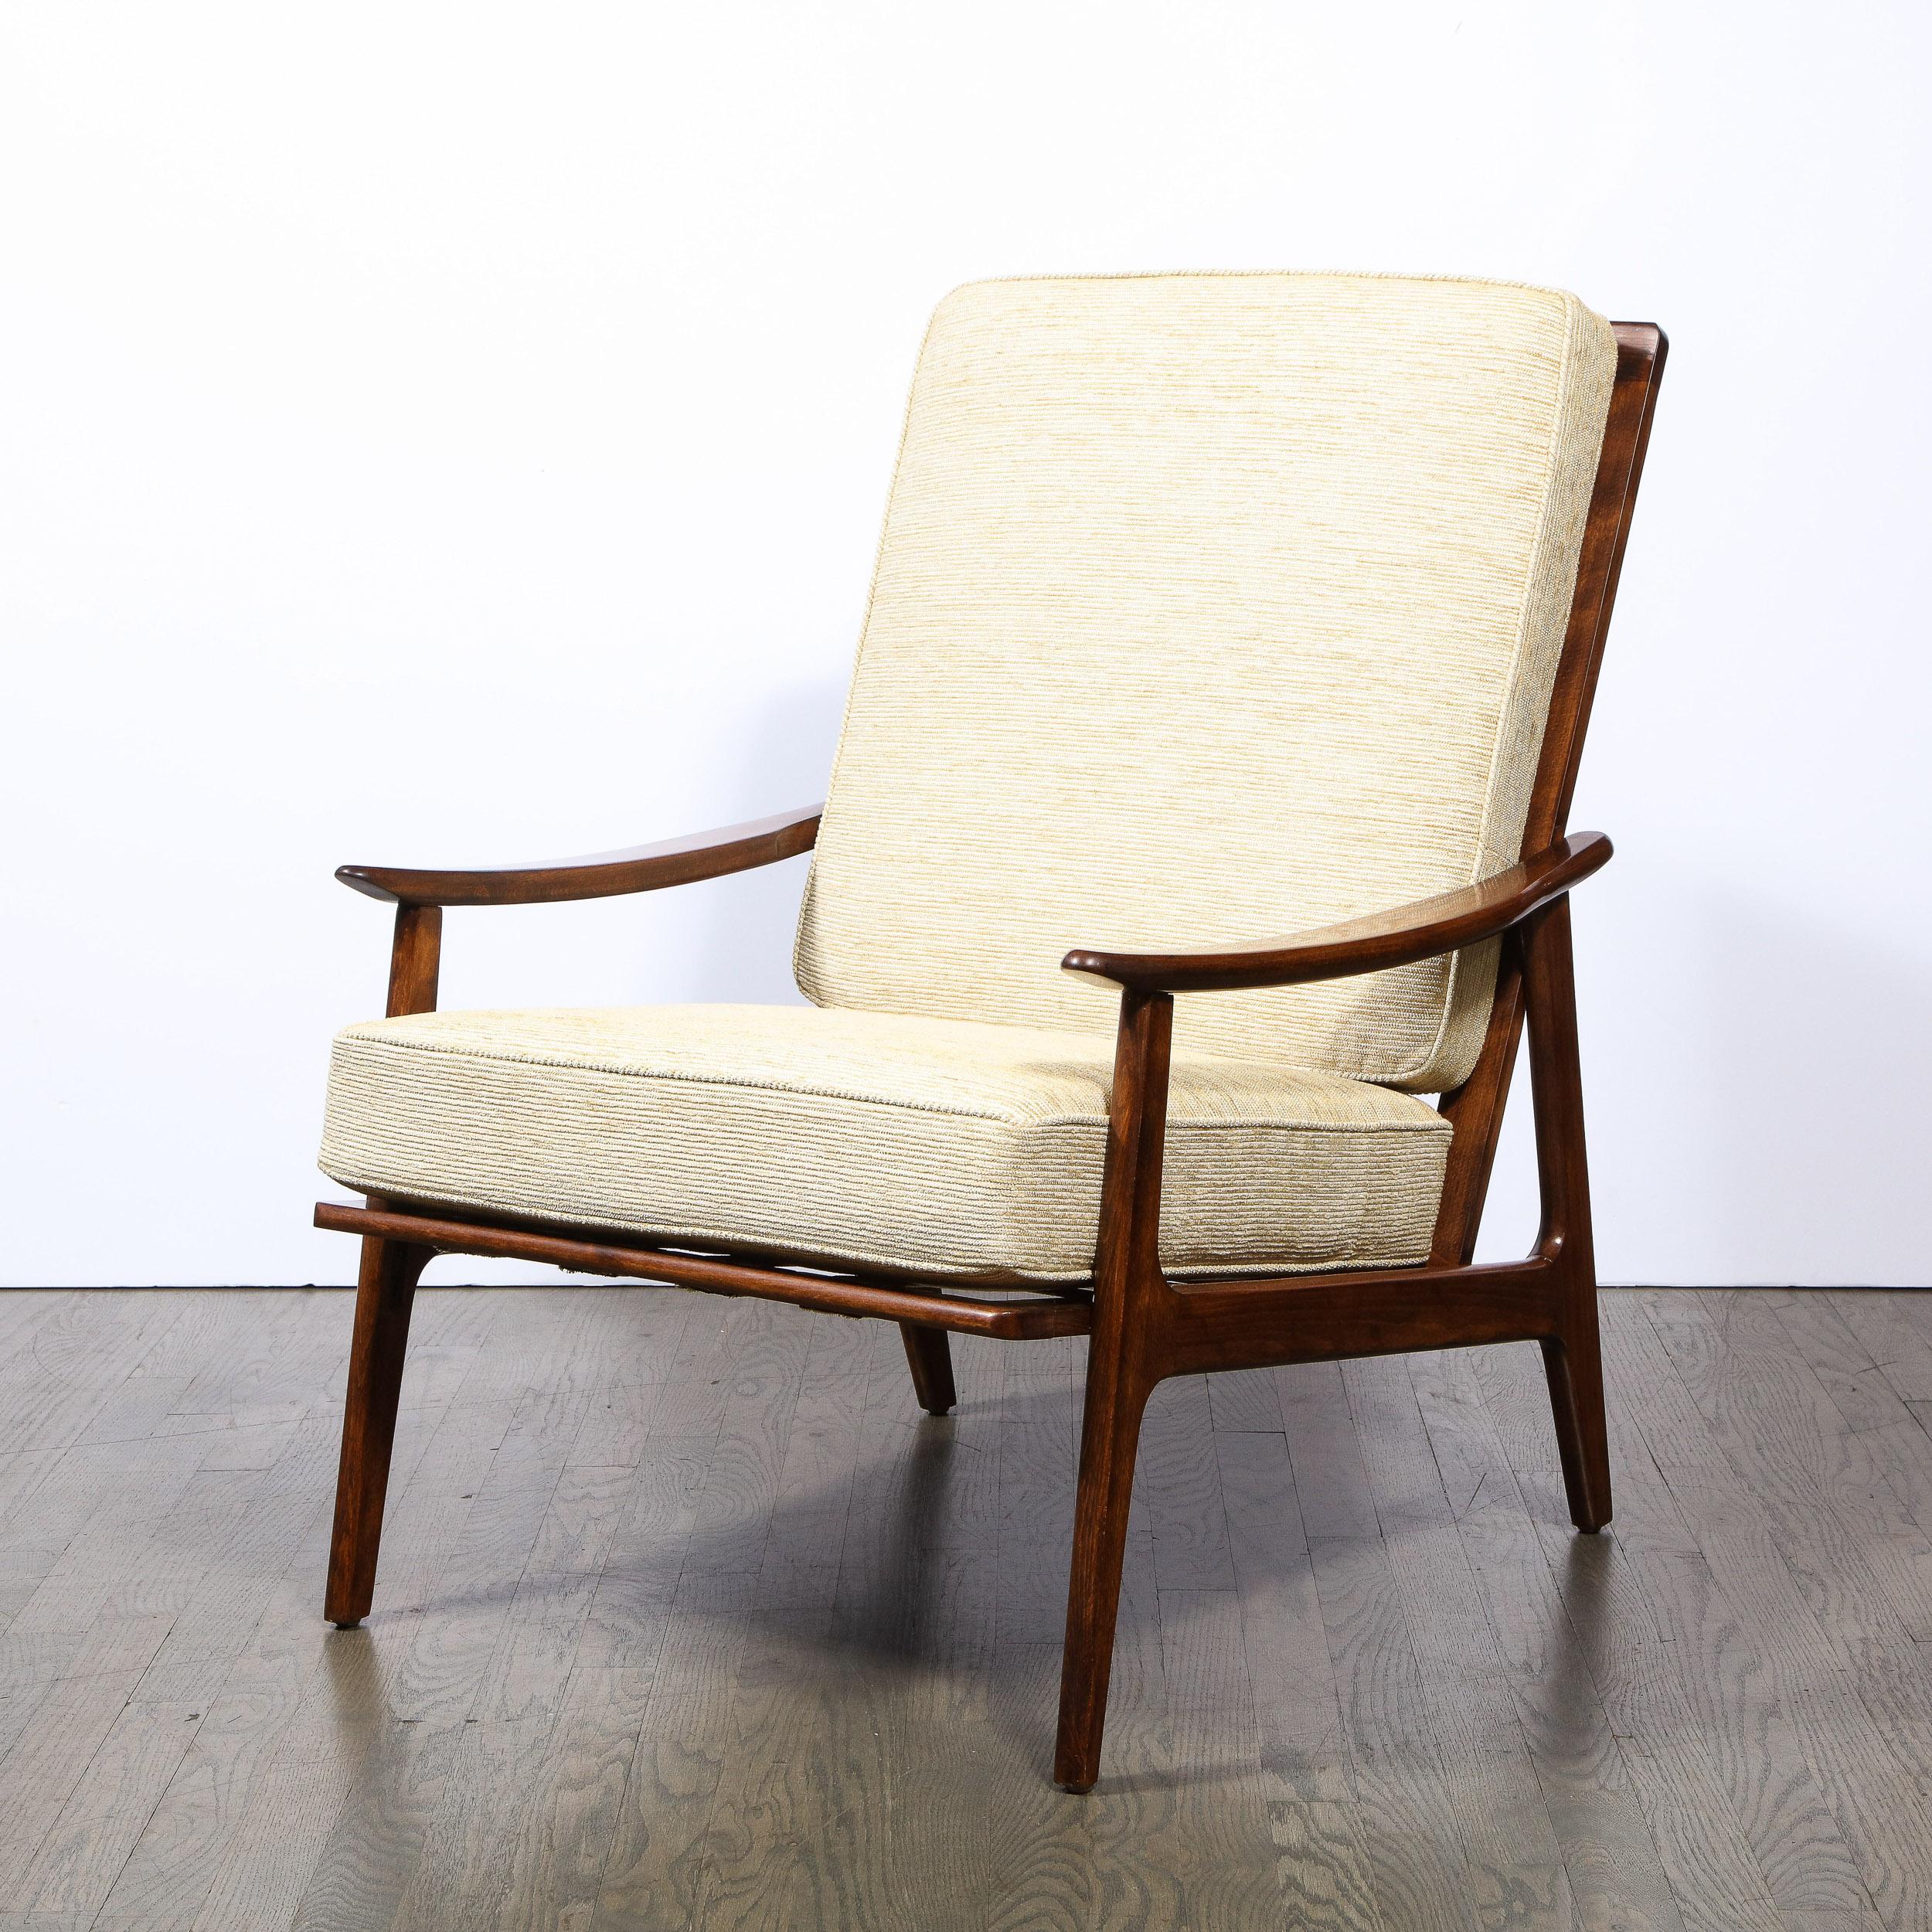 American Mid-Century Modern Hand Rubbed Walnut Lounge Chair in Holly Hunt Upholstery